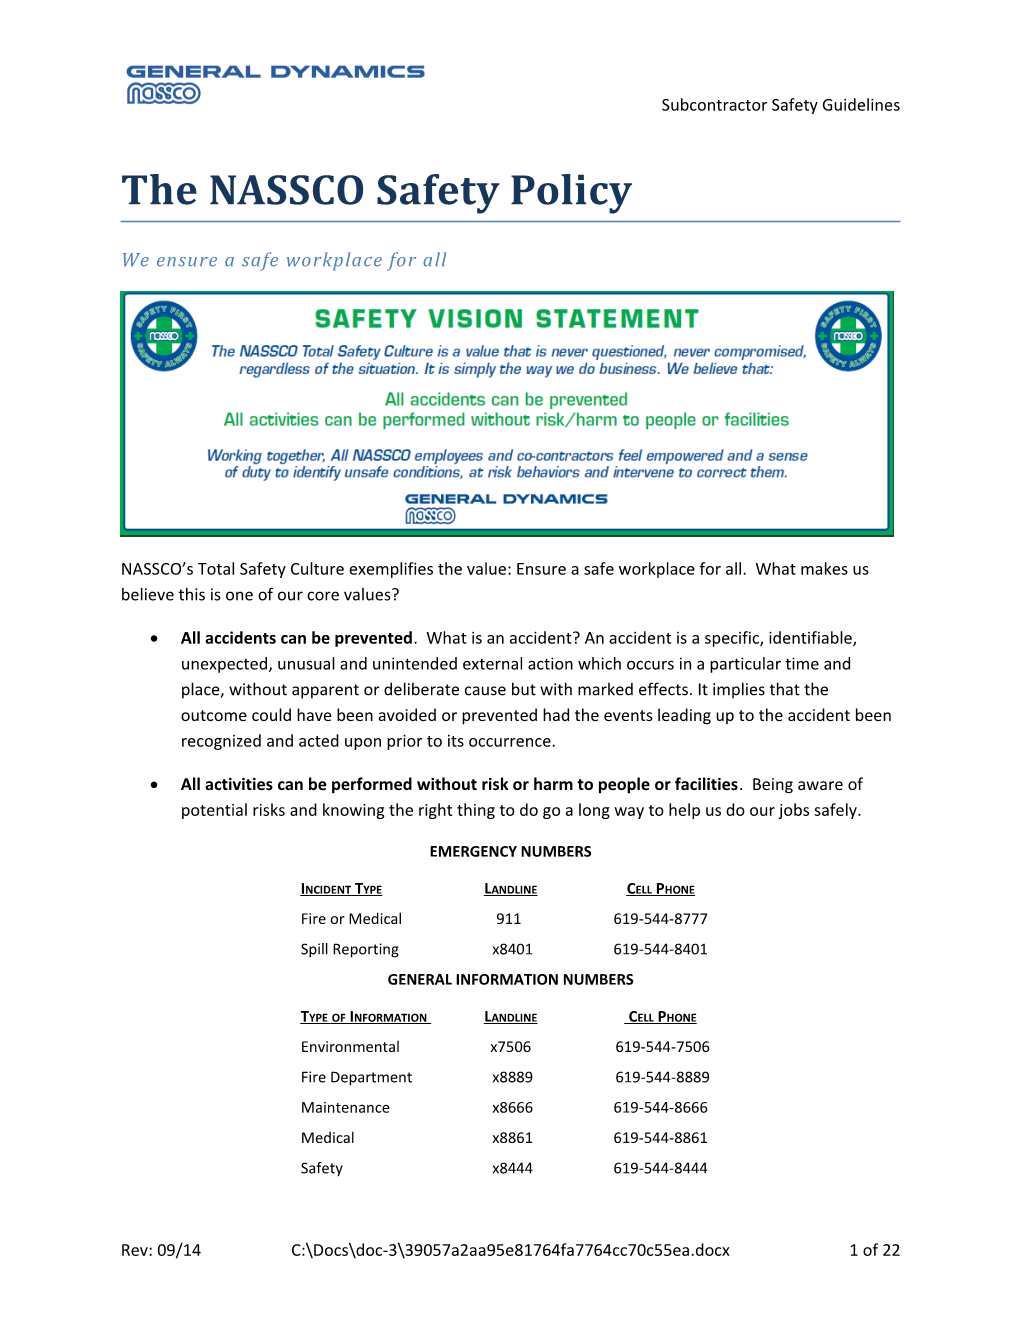 The NASSCO Safety Policy